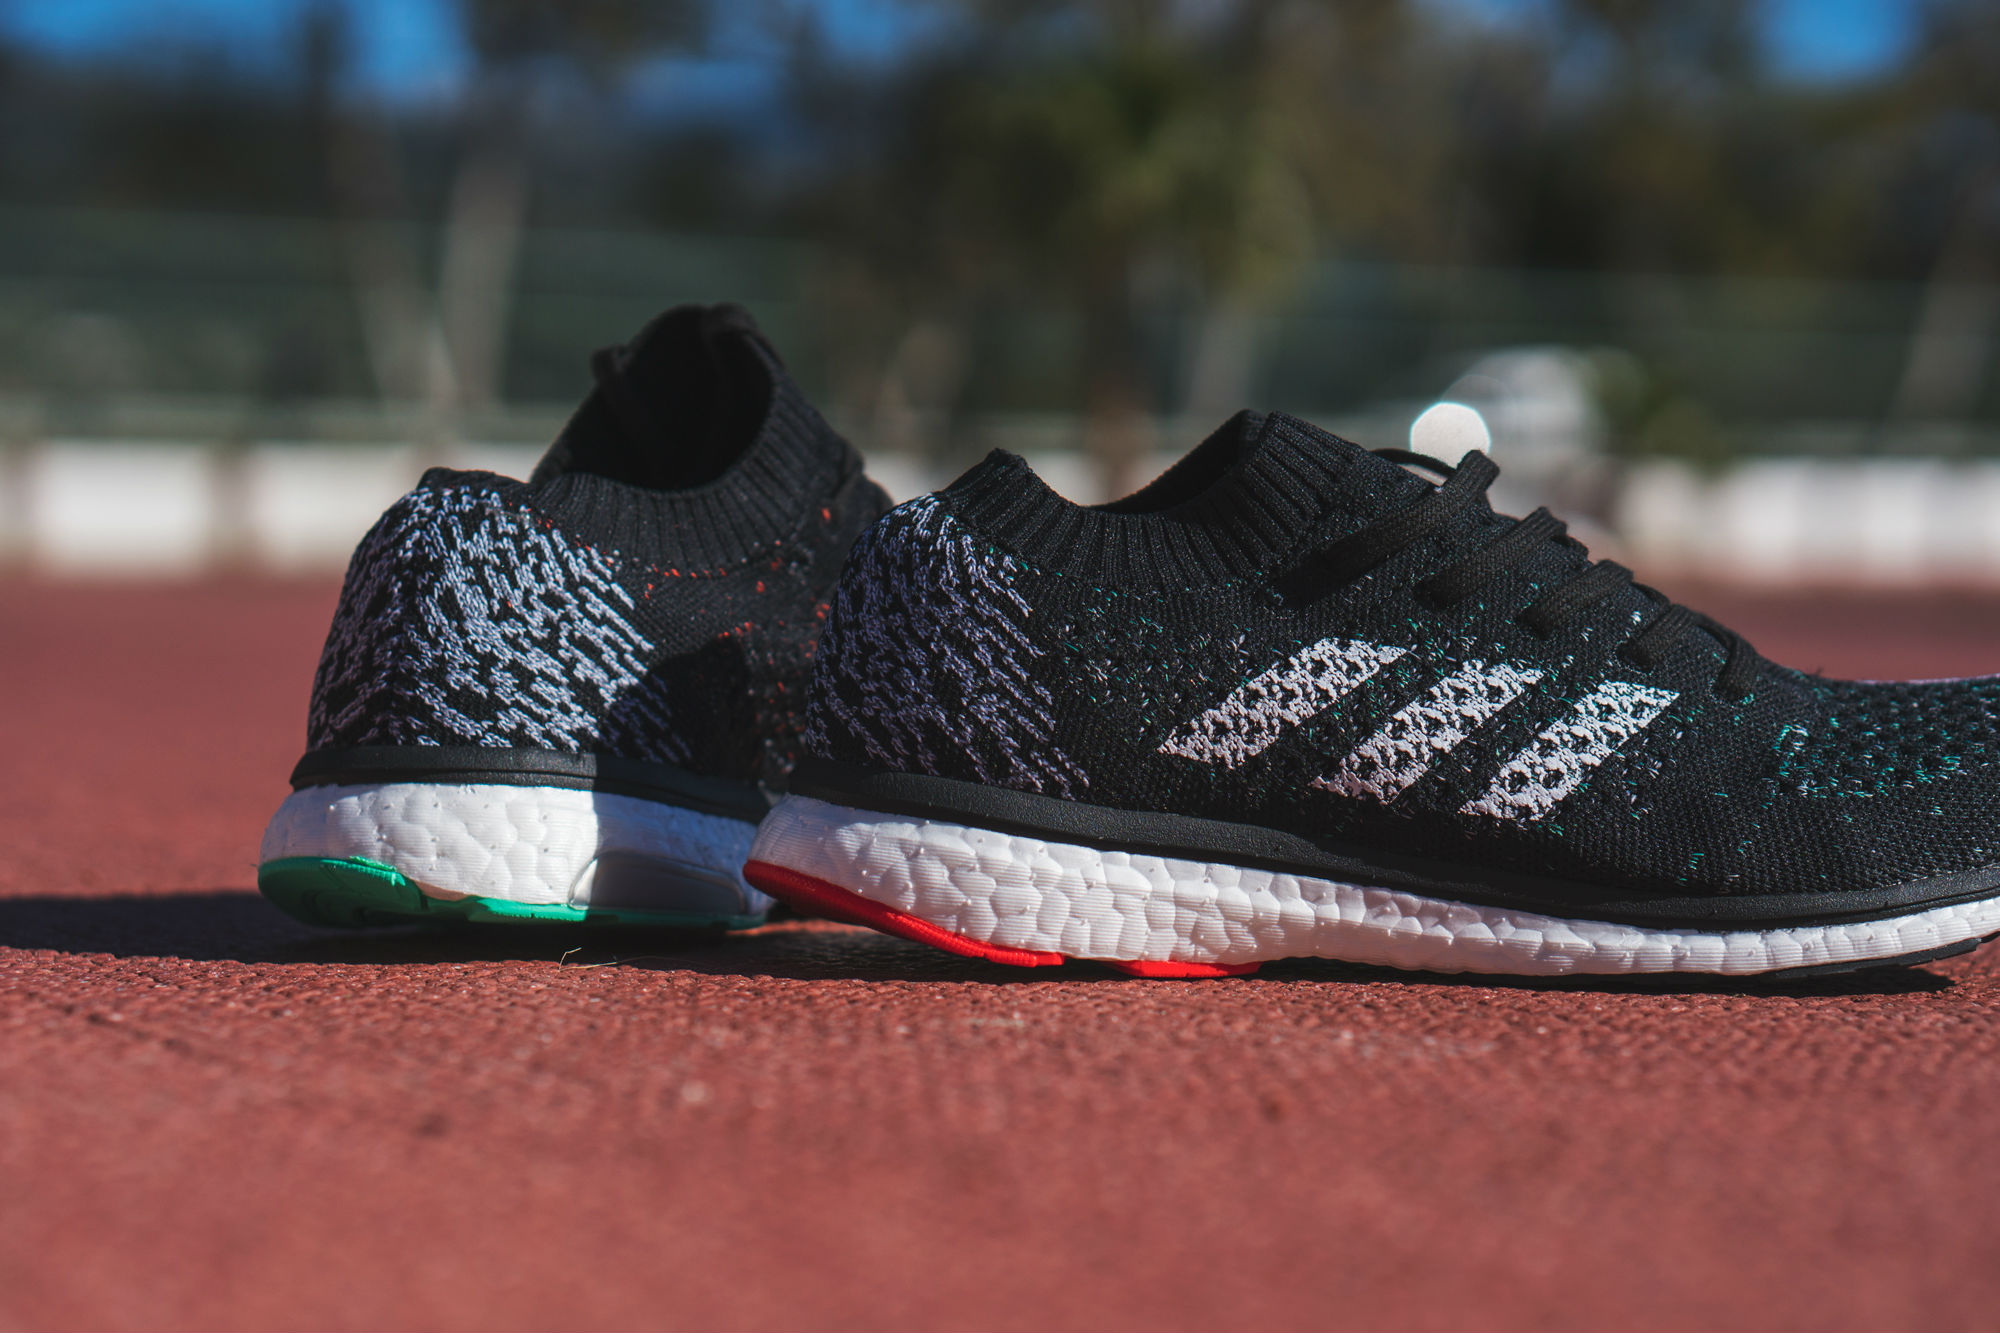 Villain Driving force National Take a Look at the adidas adizero Prime LTD in 'Core Black' - WearTesters